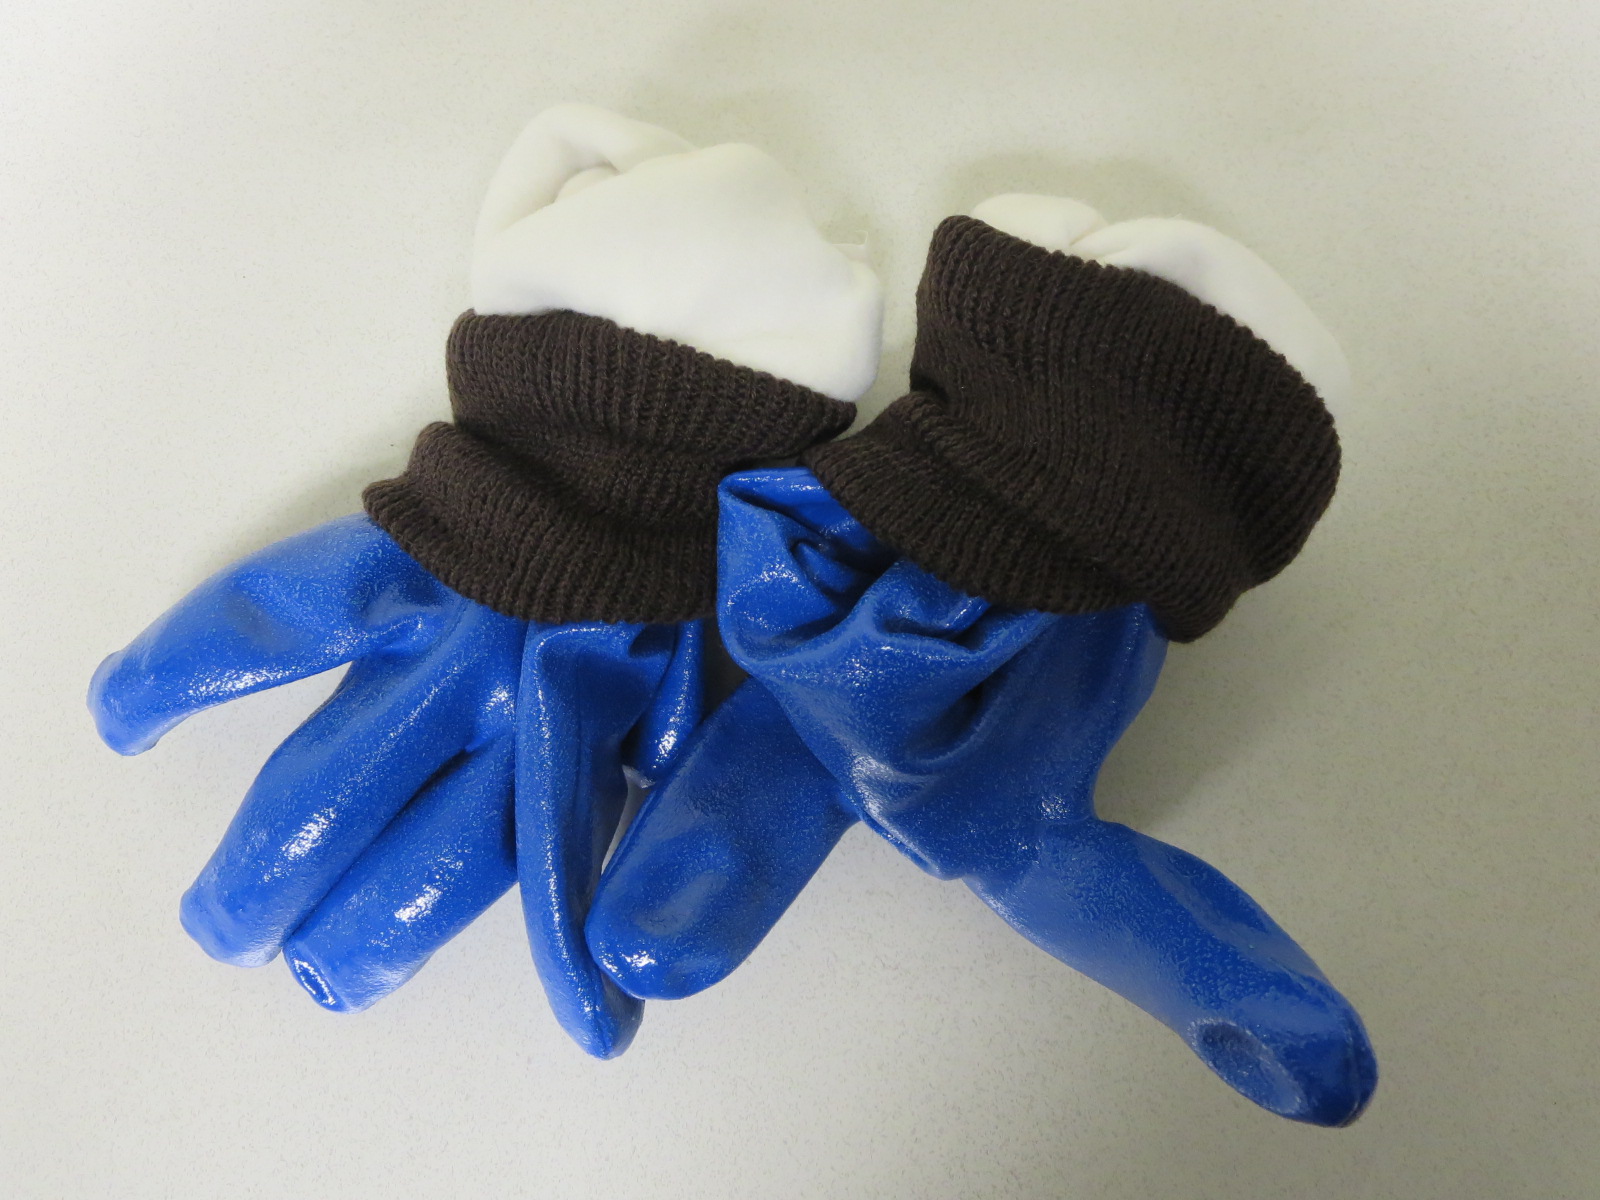 #N230FLKL Superior Glove® North Sea Insulated Water-Proof Nitrile Coated Gloves w/ Knit Cuffs